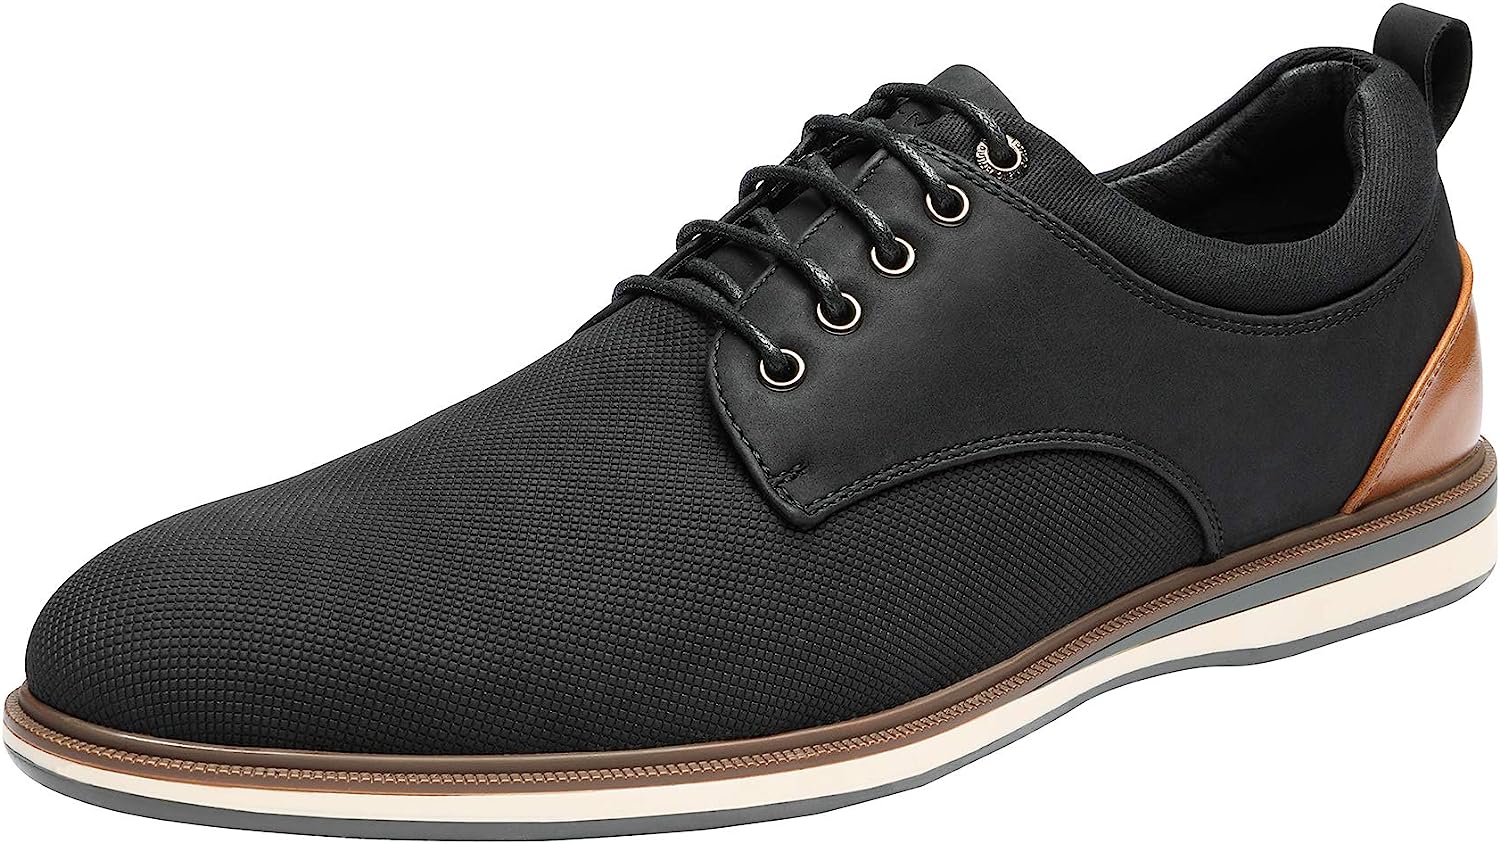 Bruno Marc Men's Dress Shoes Casual Oxford